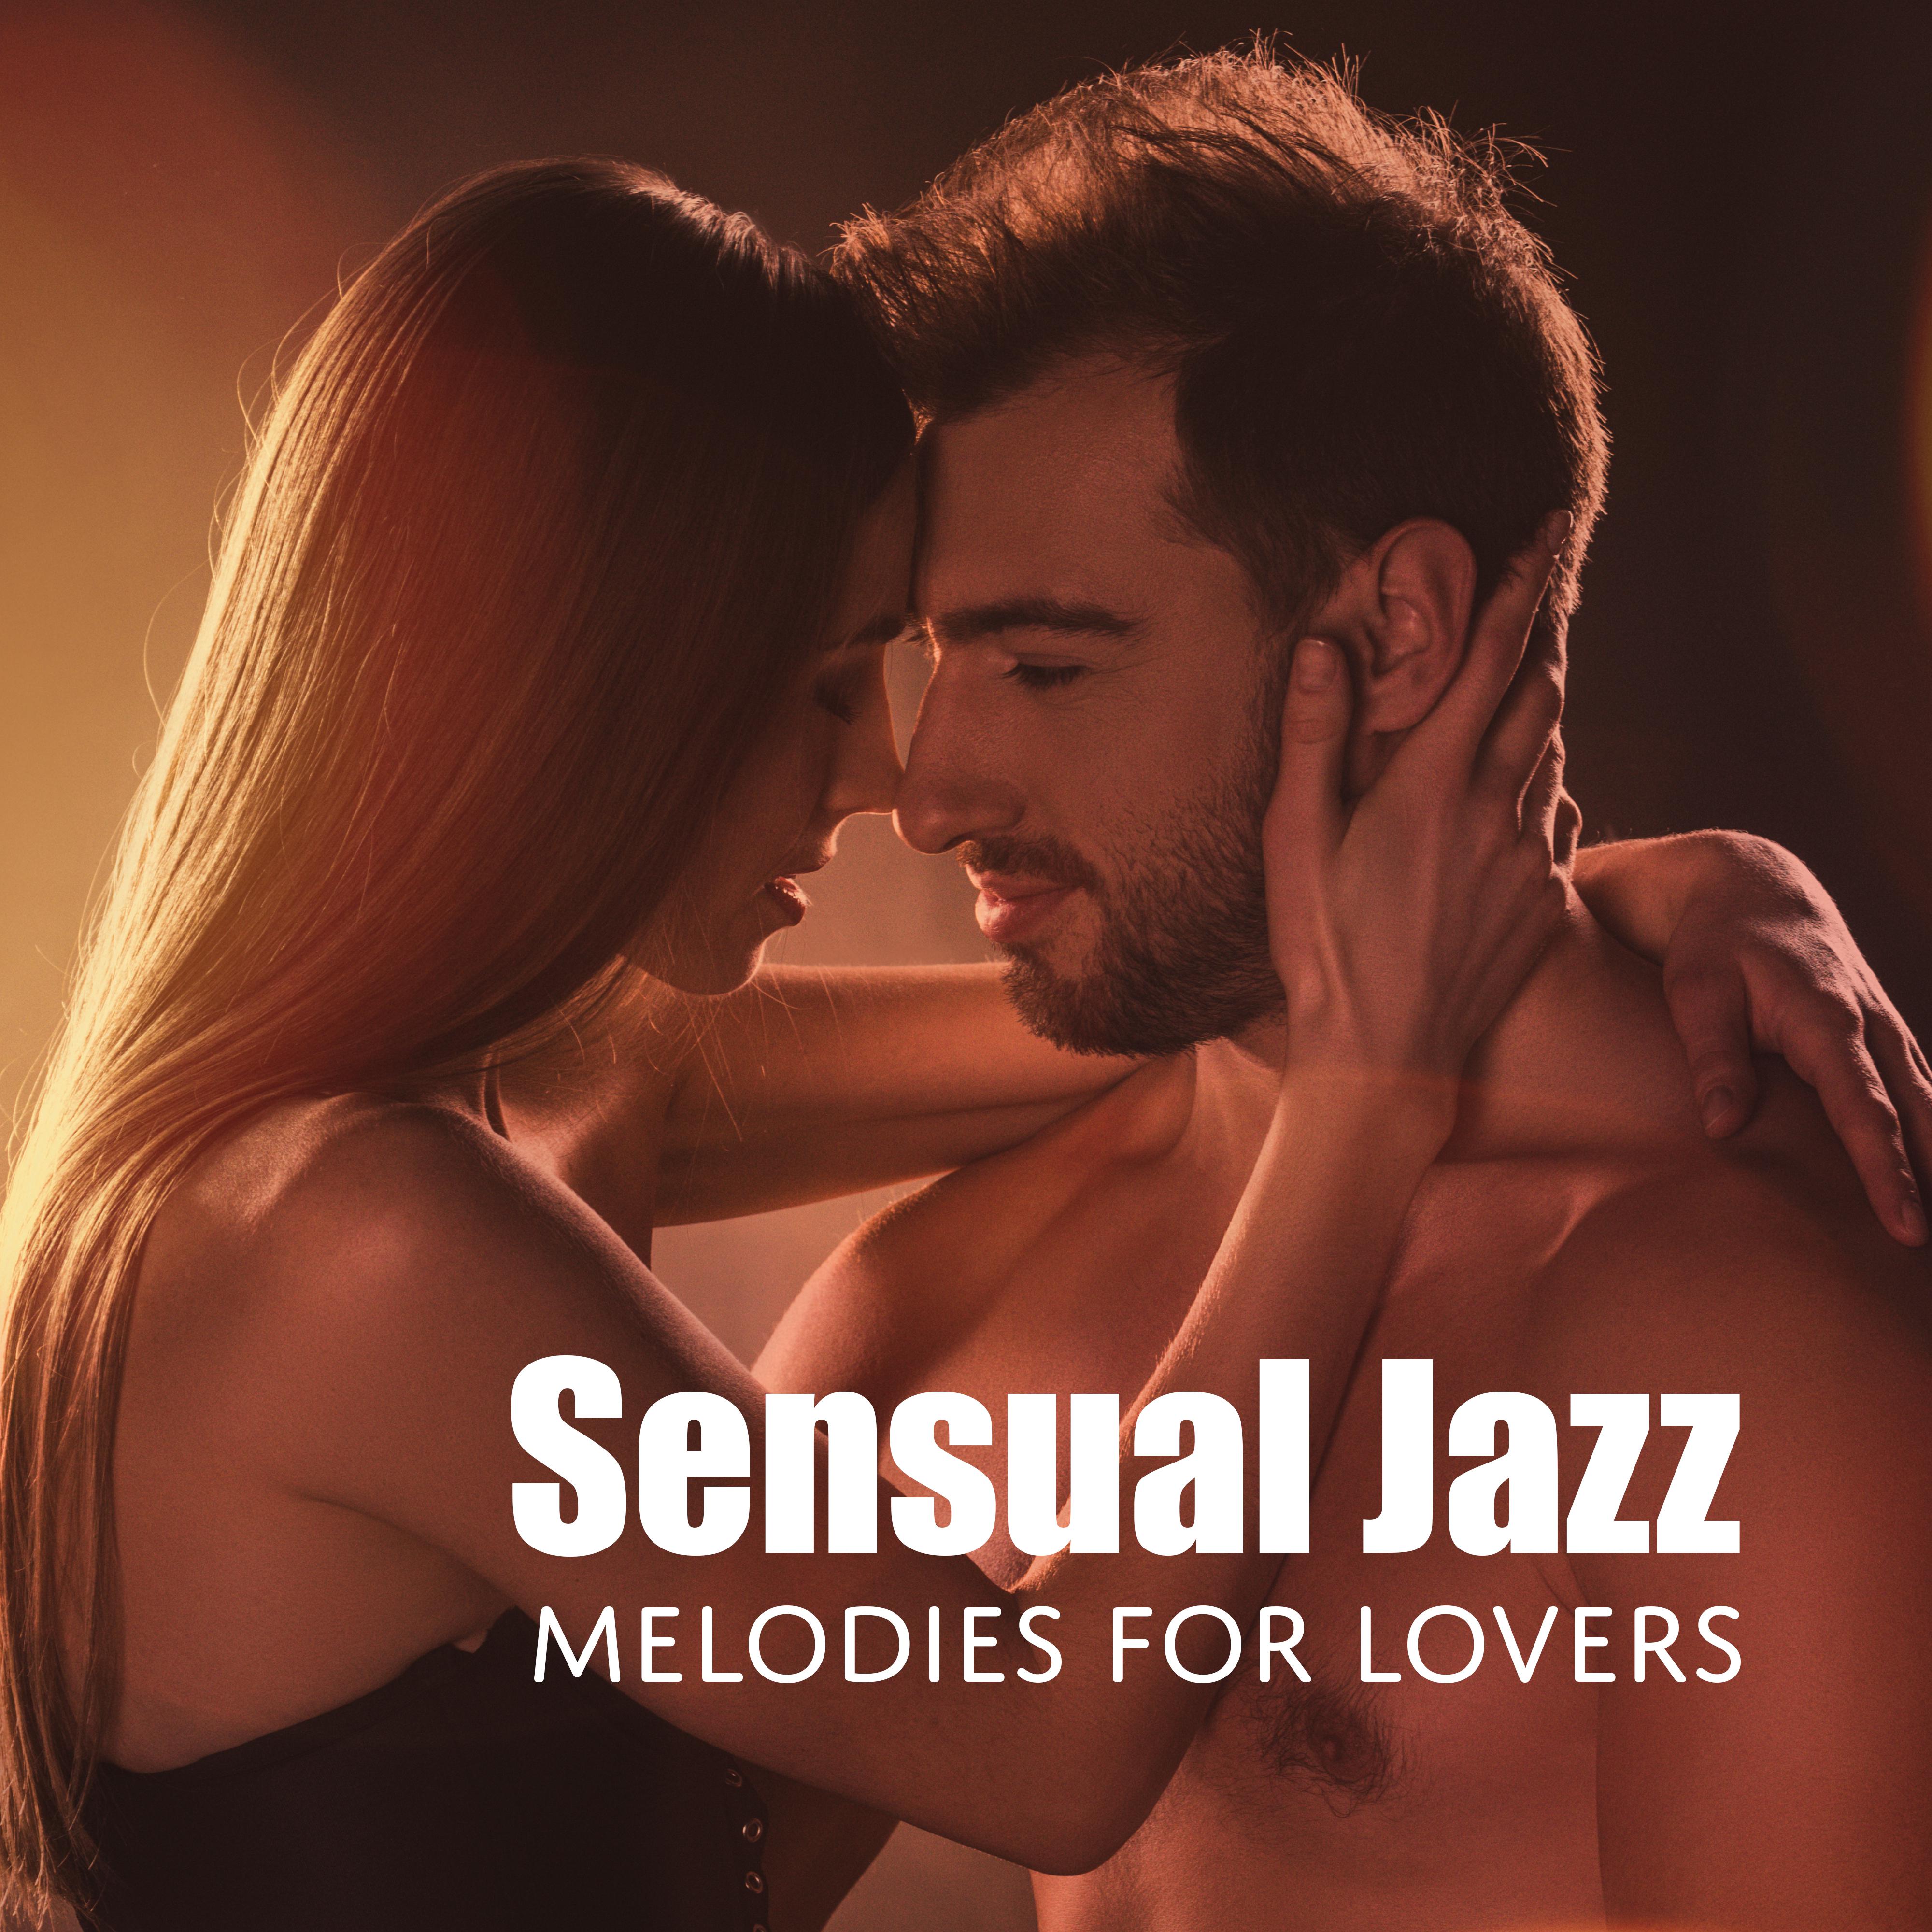 Sensual Jazz Melodies for Lovers